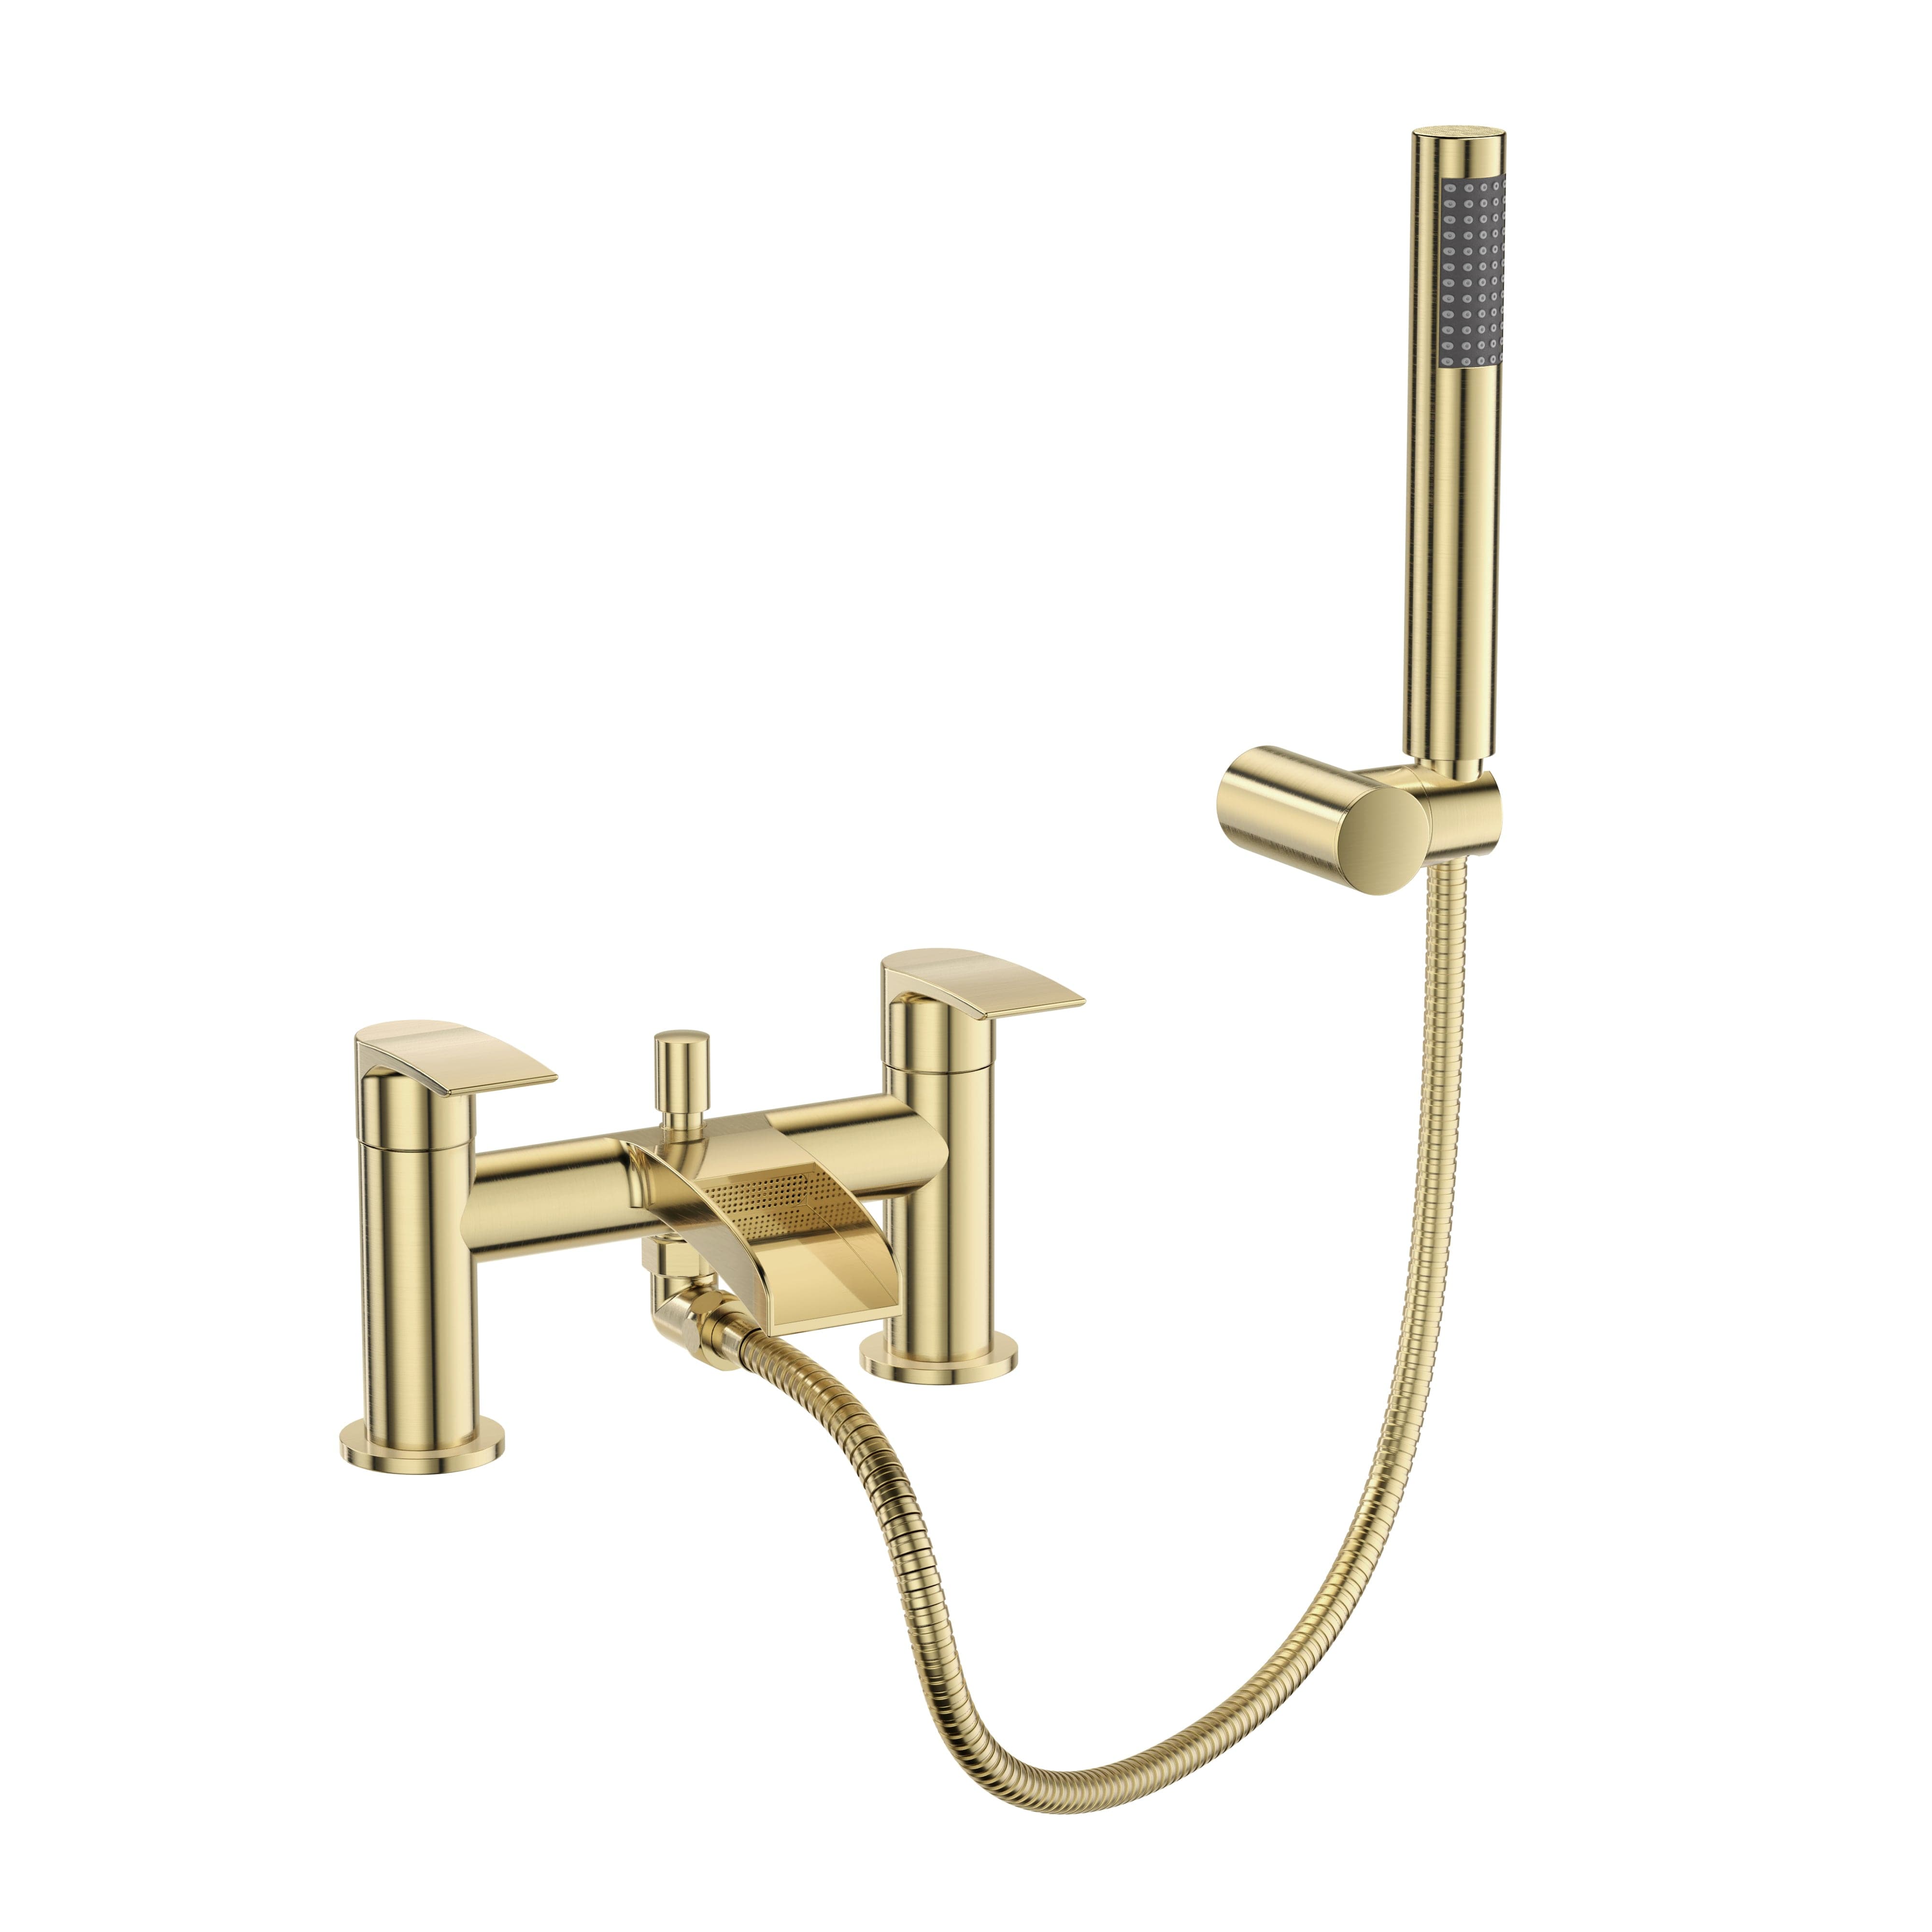 Symphony Round Waterfall Bath Shower Mixer Tap with Kit - Brushed Brass